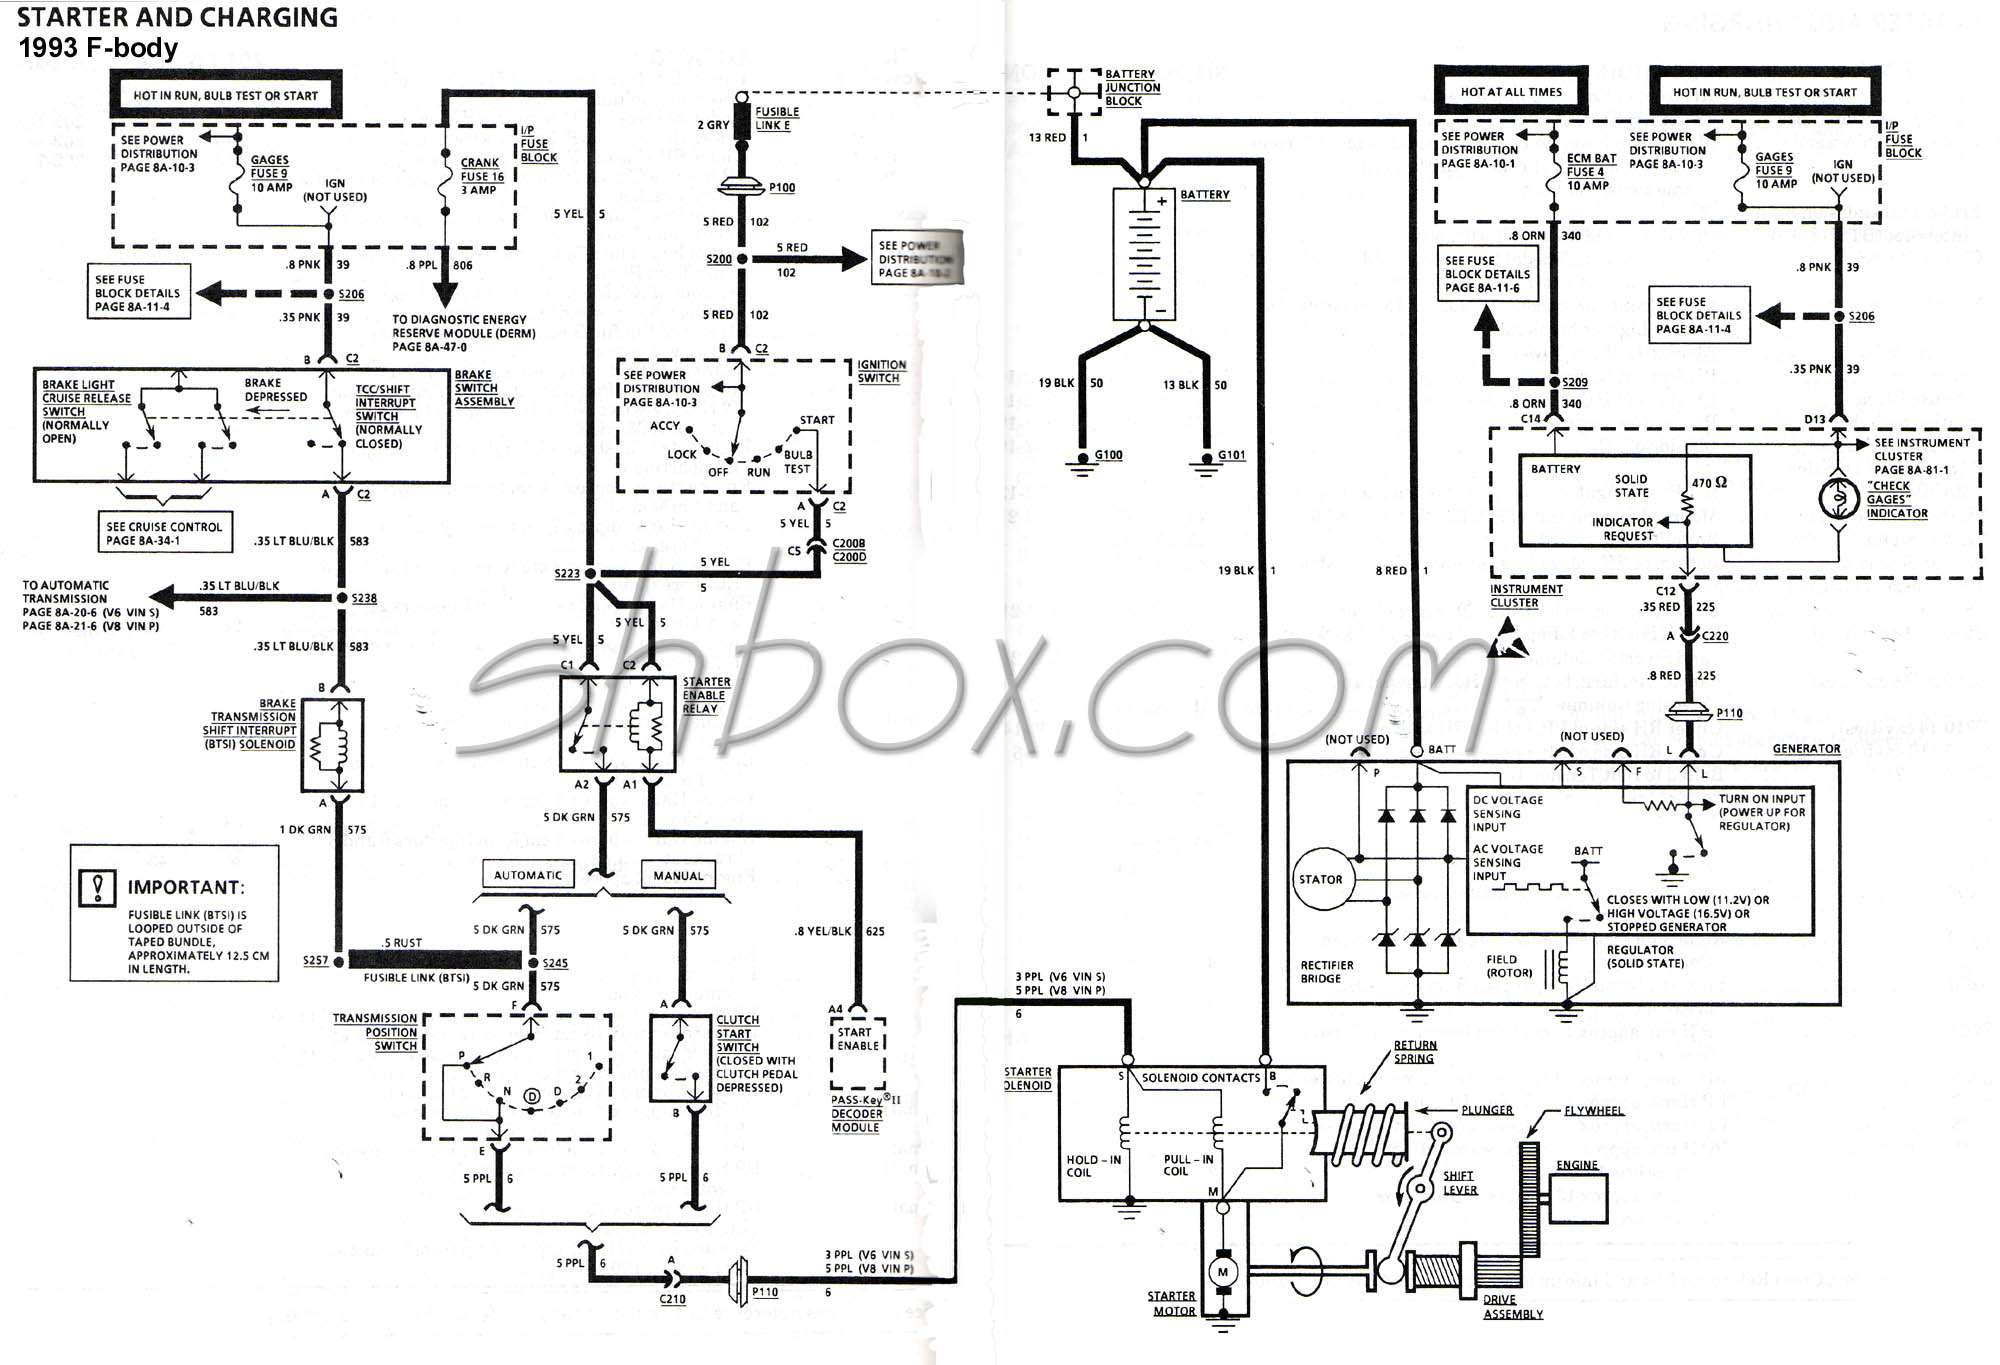 Passkey 3 Bypass Diagram F Body Wiring Diagram Wire Management Wiring Diagram